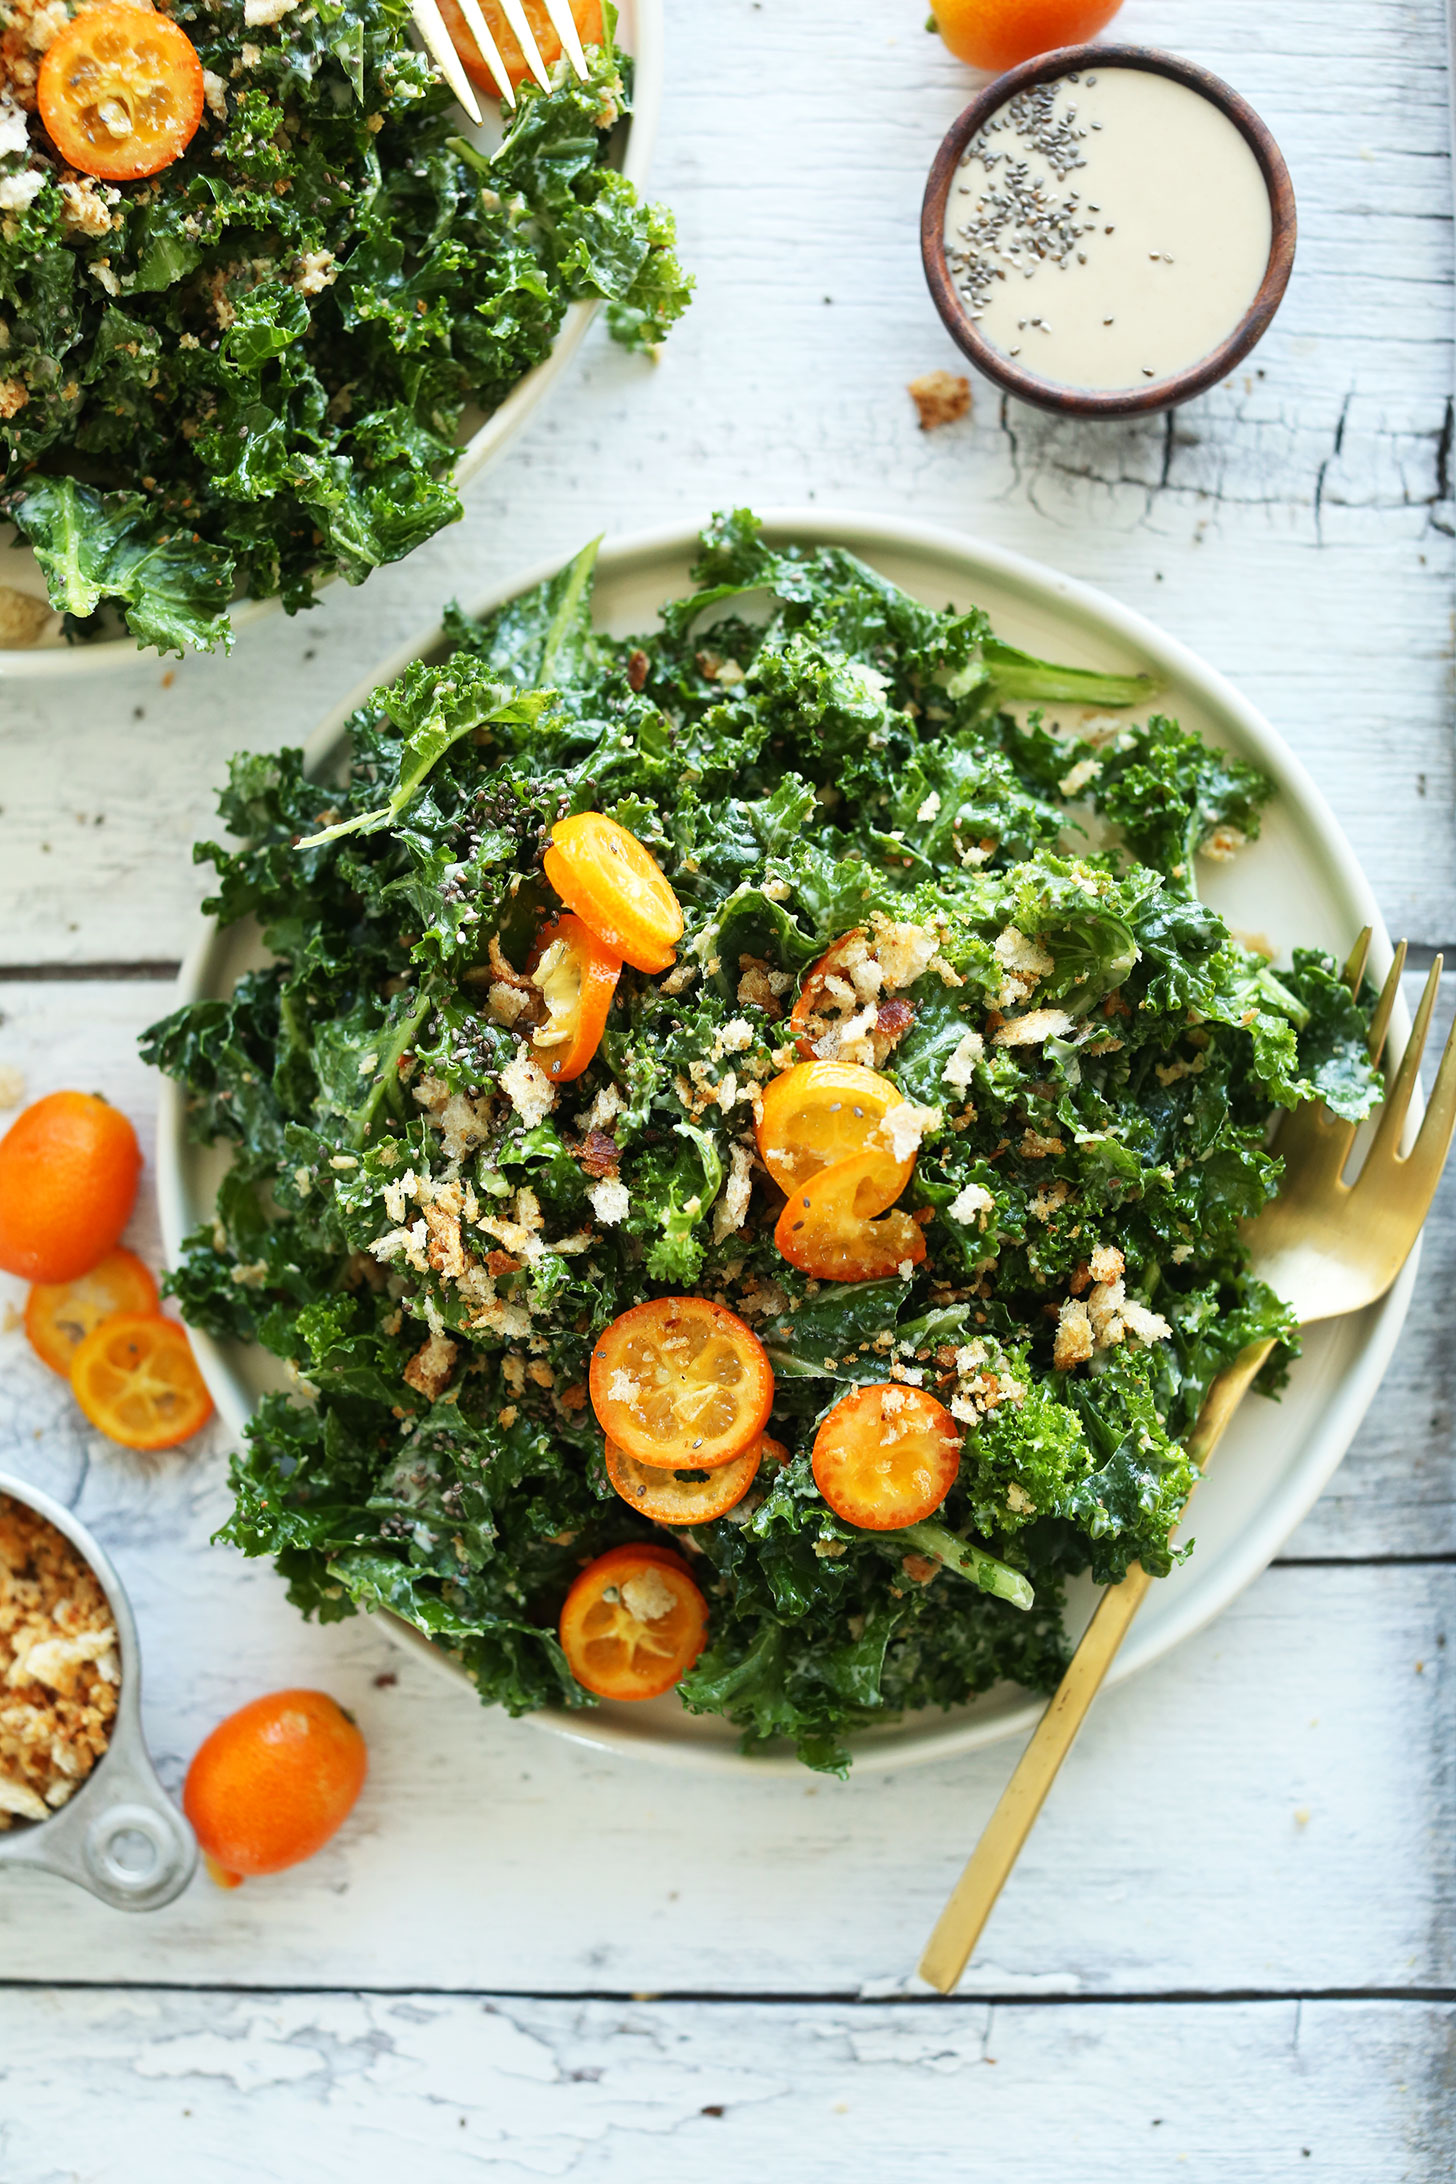 Dinner plate filled with our healthy and simple Kale Salad with Kumquats, Chia Seeds, and Tahini Dressing